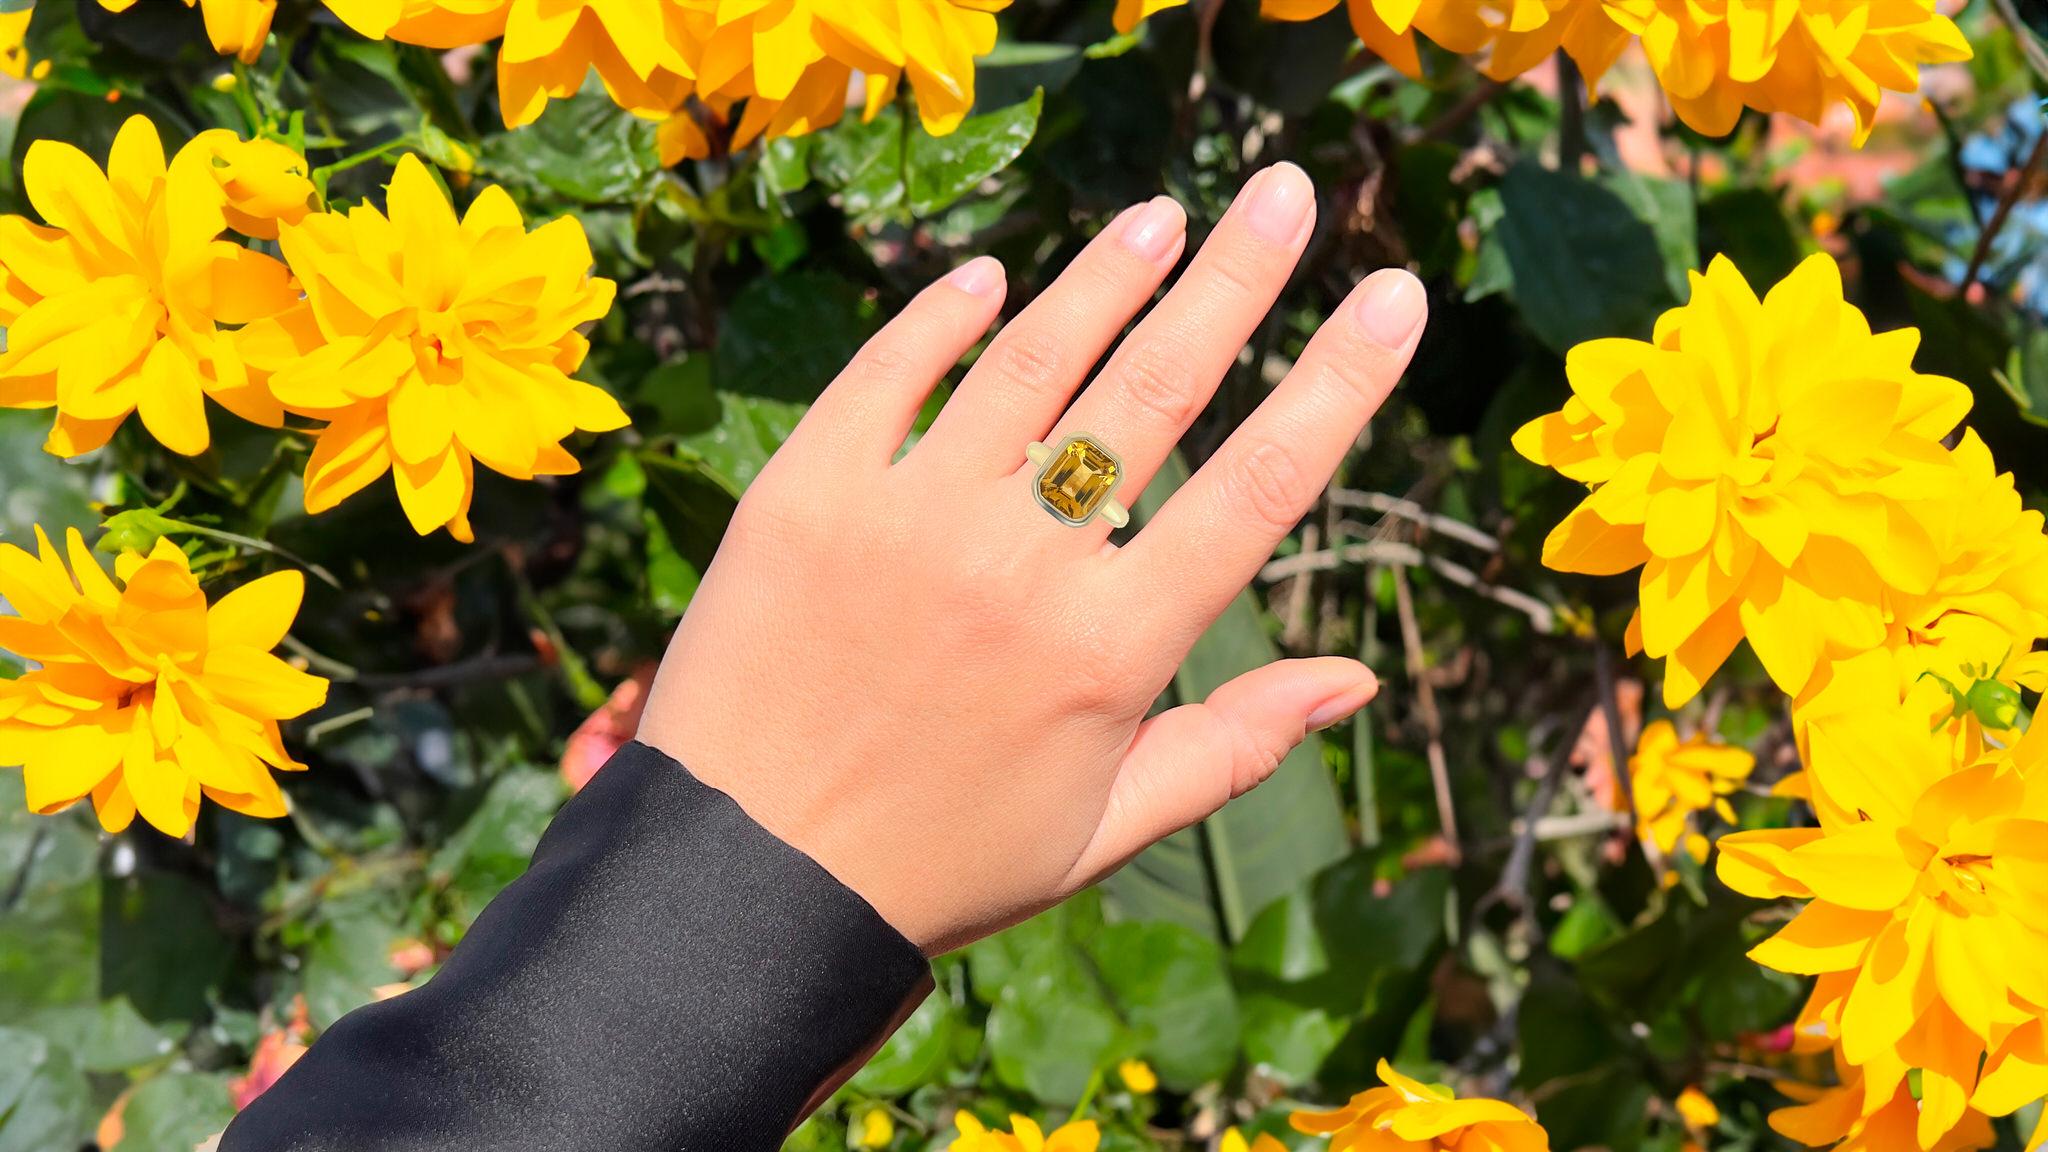 It comes with the Gemological Appraisal by GIA GG/AJP
All Gemstones are Natural
Citrine = 4.40 Carat
Metal: 14K Yellow Gold
Ring Size: 8* US
*It can be resized complimentary